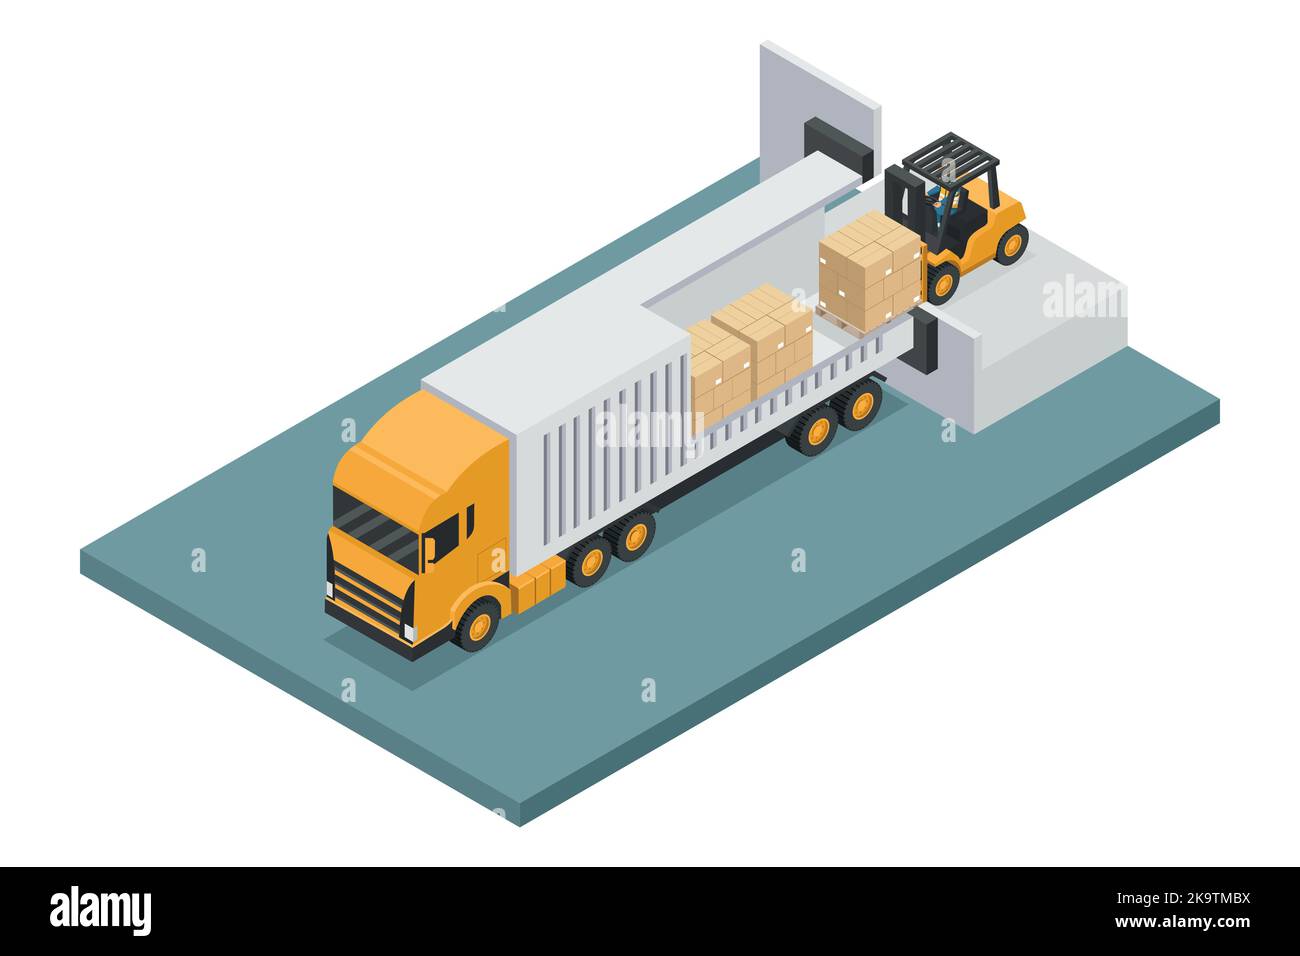 Isometric forklift unloading stacked boxes on pallet from container truck at unloading dock. Safety in handling a fork lift truck. Industrial logistic Stock Vector